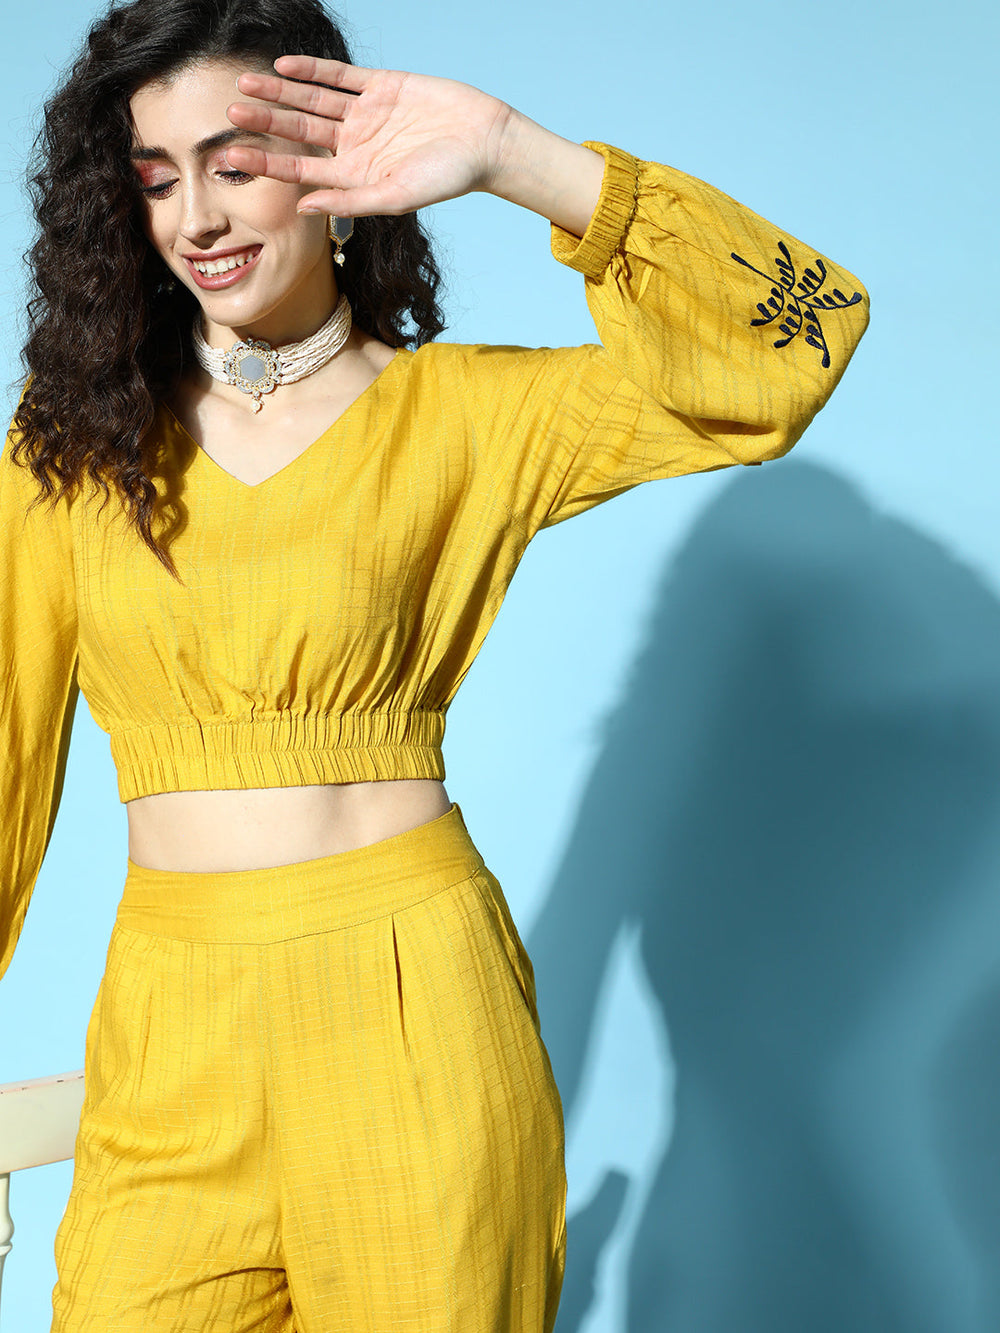 Women Mustard Self Weave Rayon Co-ords Set Has Crop Top With Round Neck, Elastic At Waistline, Gathers All Over At Waist, Full Sleeves Has Elastic At The Hem, Thread Embroidery At Sleeves, Mustard Palazzo Has Flared Hem With Side Slit, Both Side Pocket And Partially Elastic At Waistline